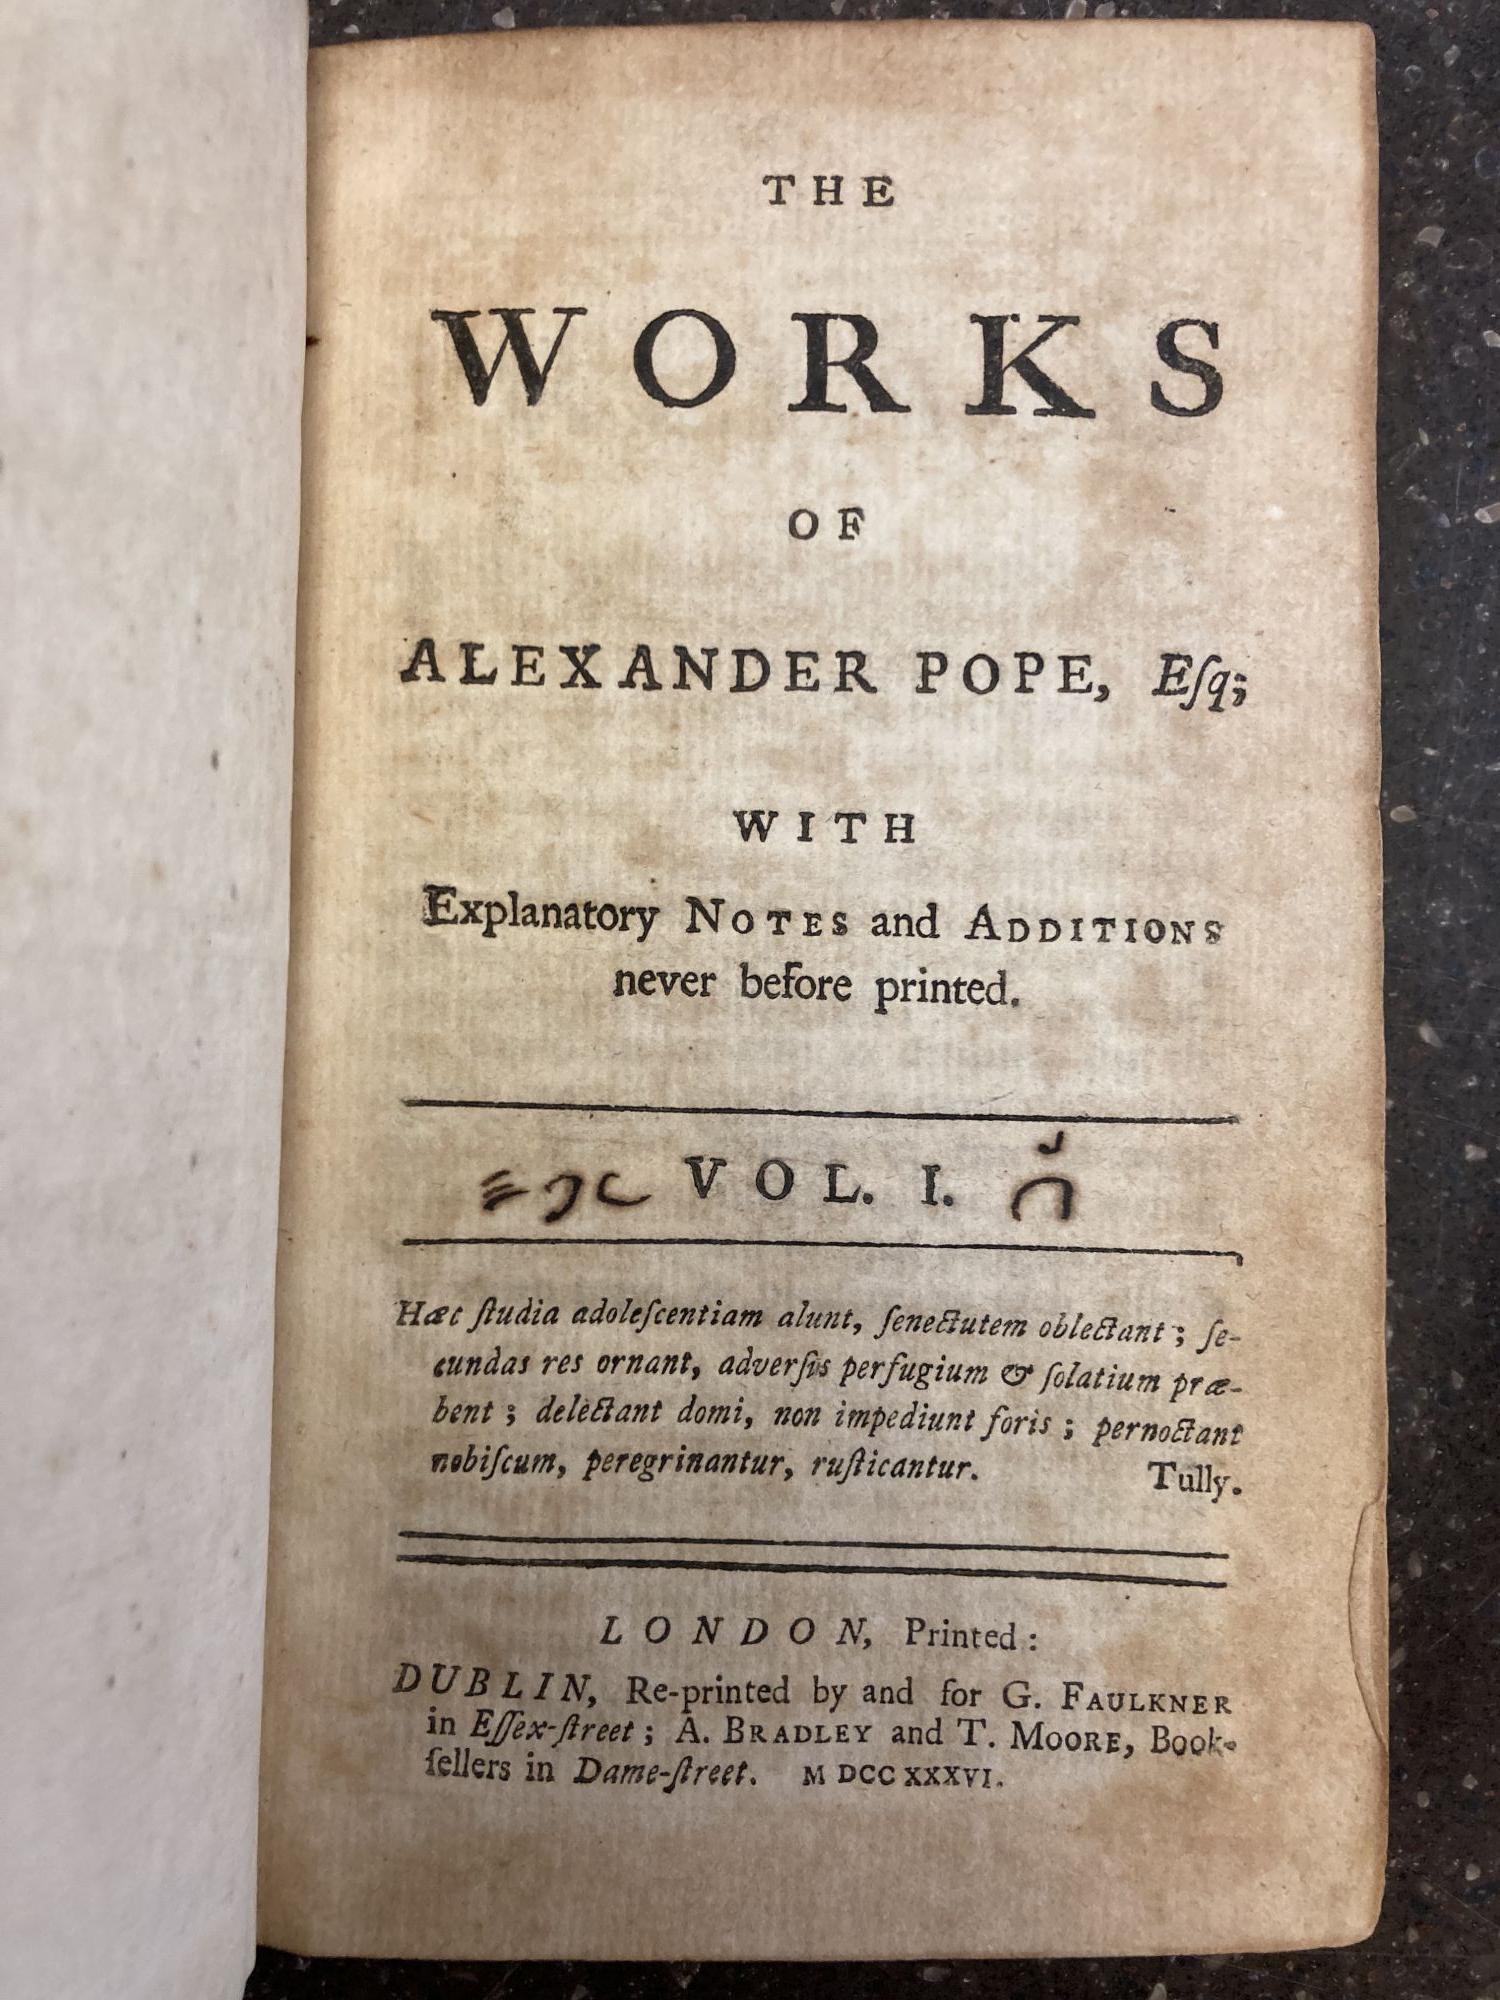 Product Image for THE WORKS OF ALEXANDER POPE [Three Volumes]